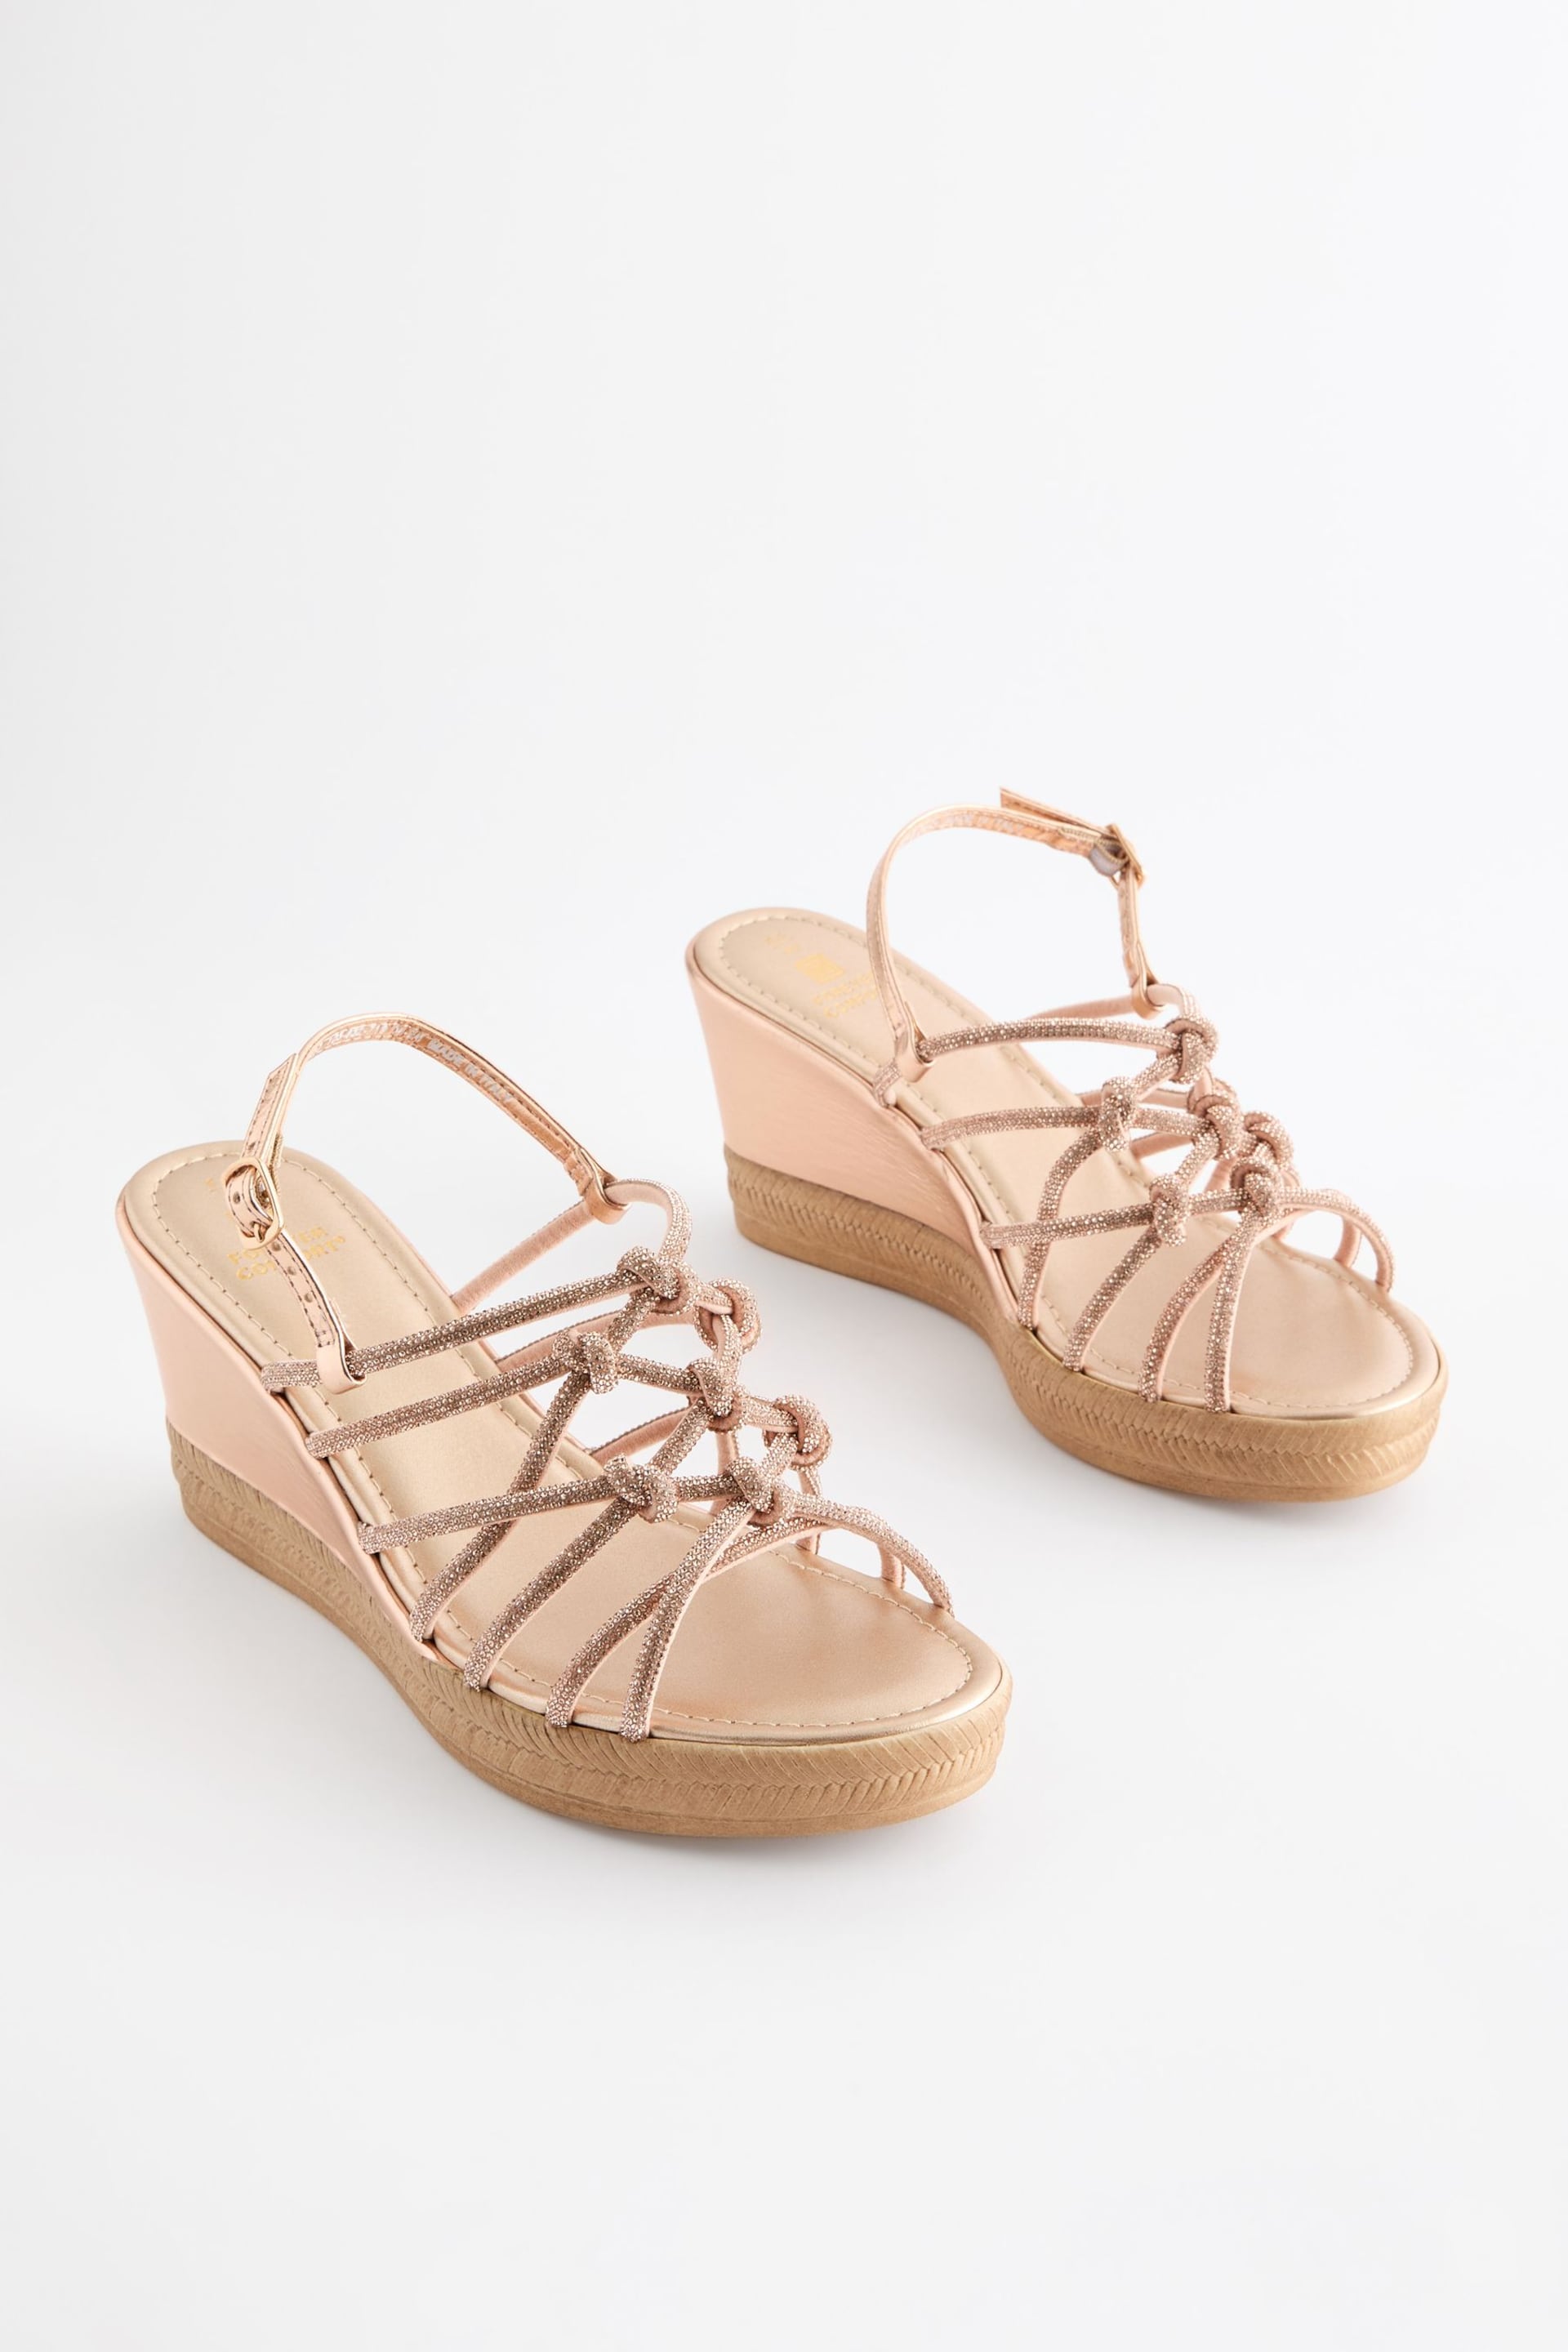 Rose Gold Forever Comfort® Jewel Knot Wedges - Image 5 of 9